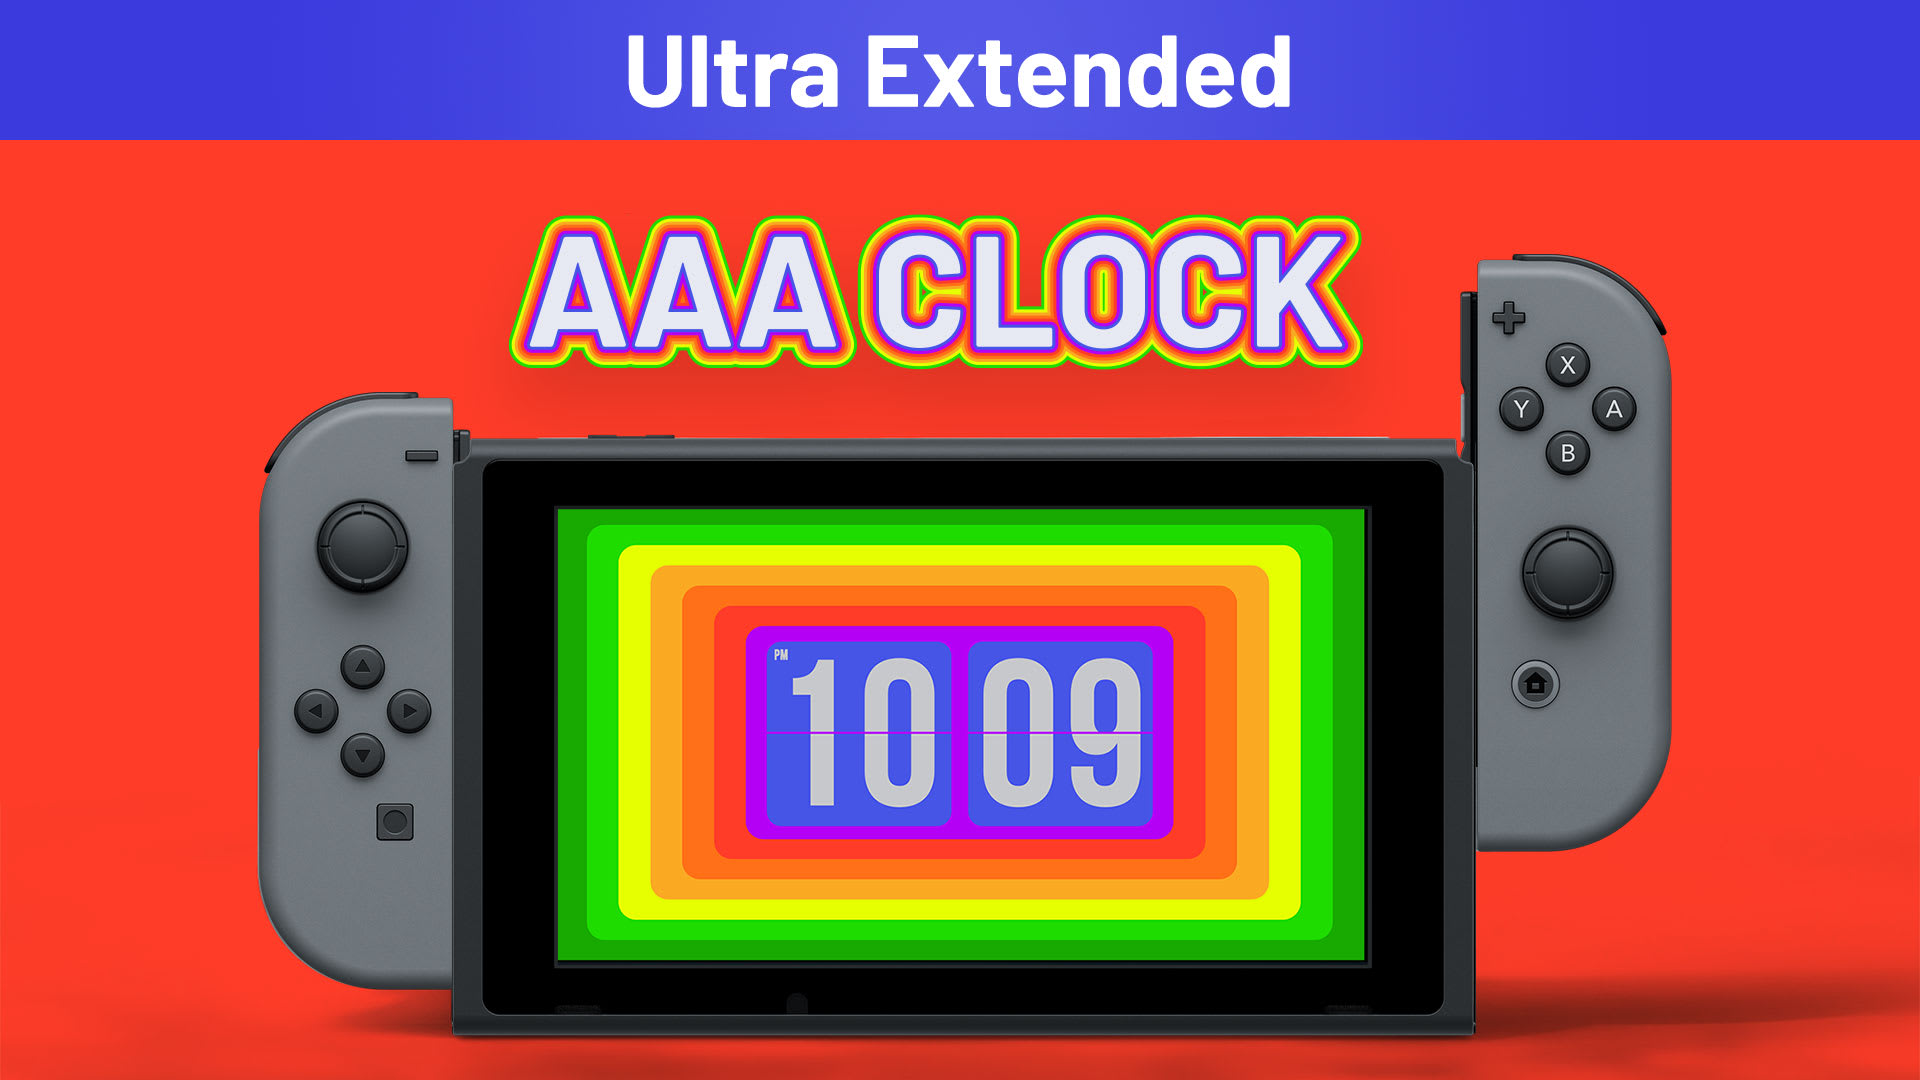 AAA Clock Ultra Extended